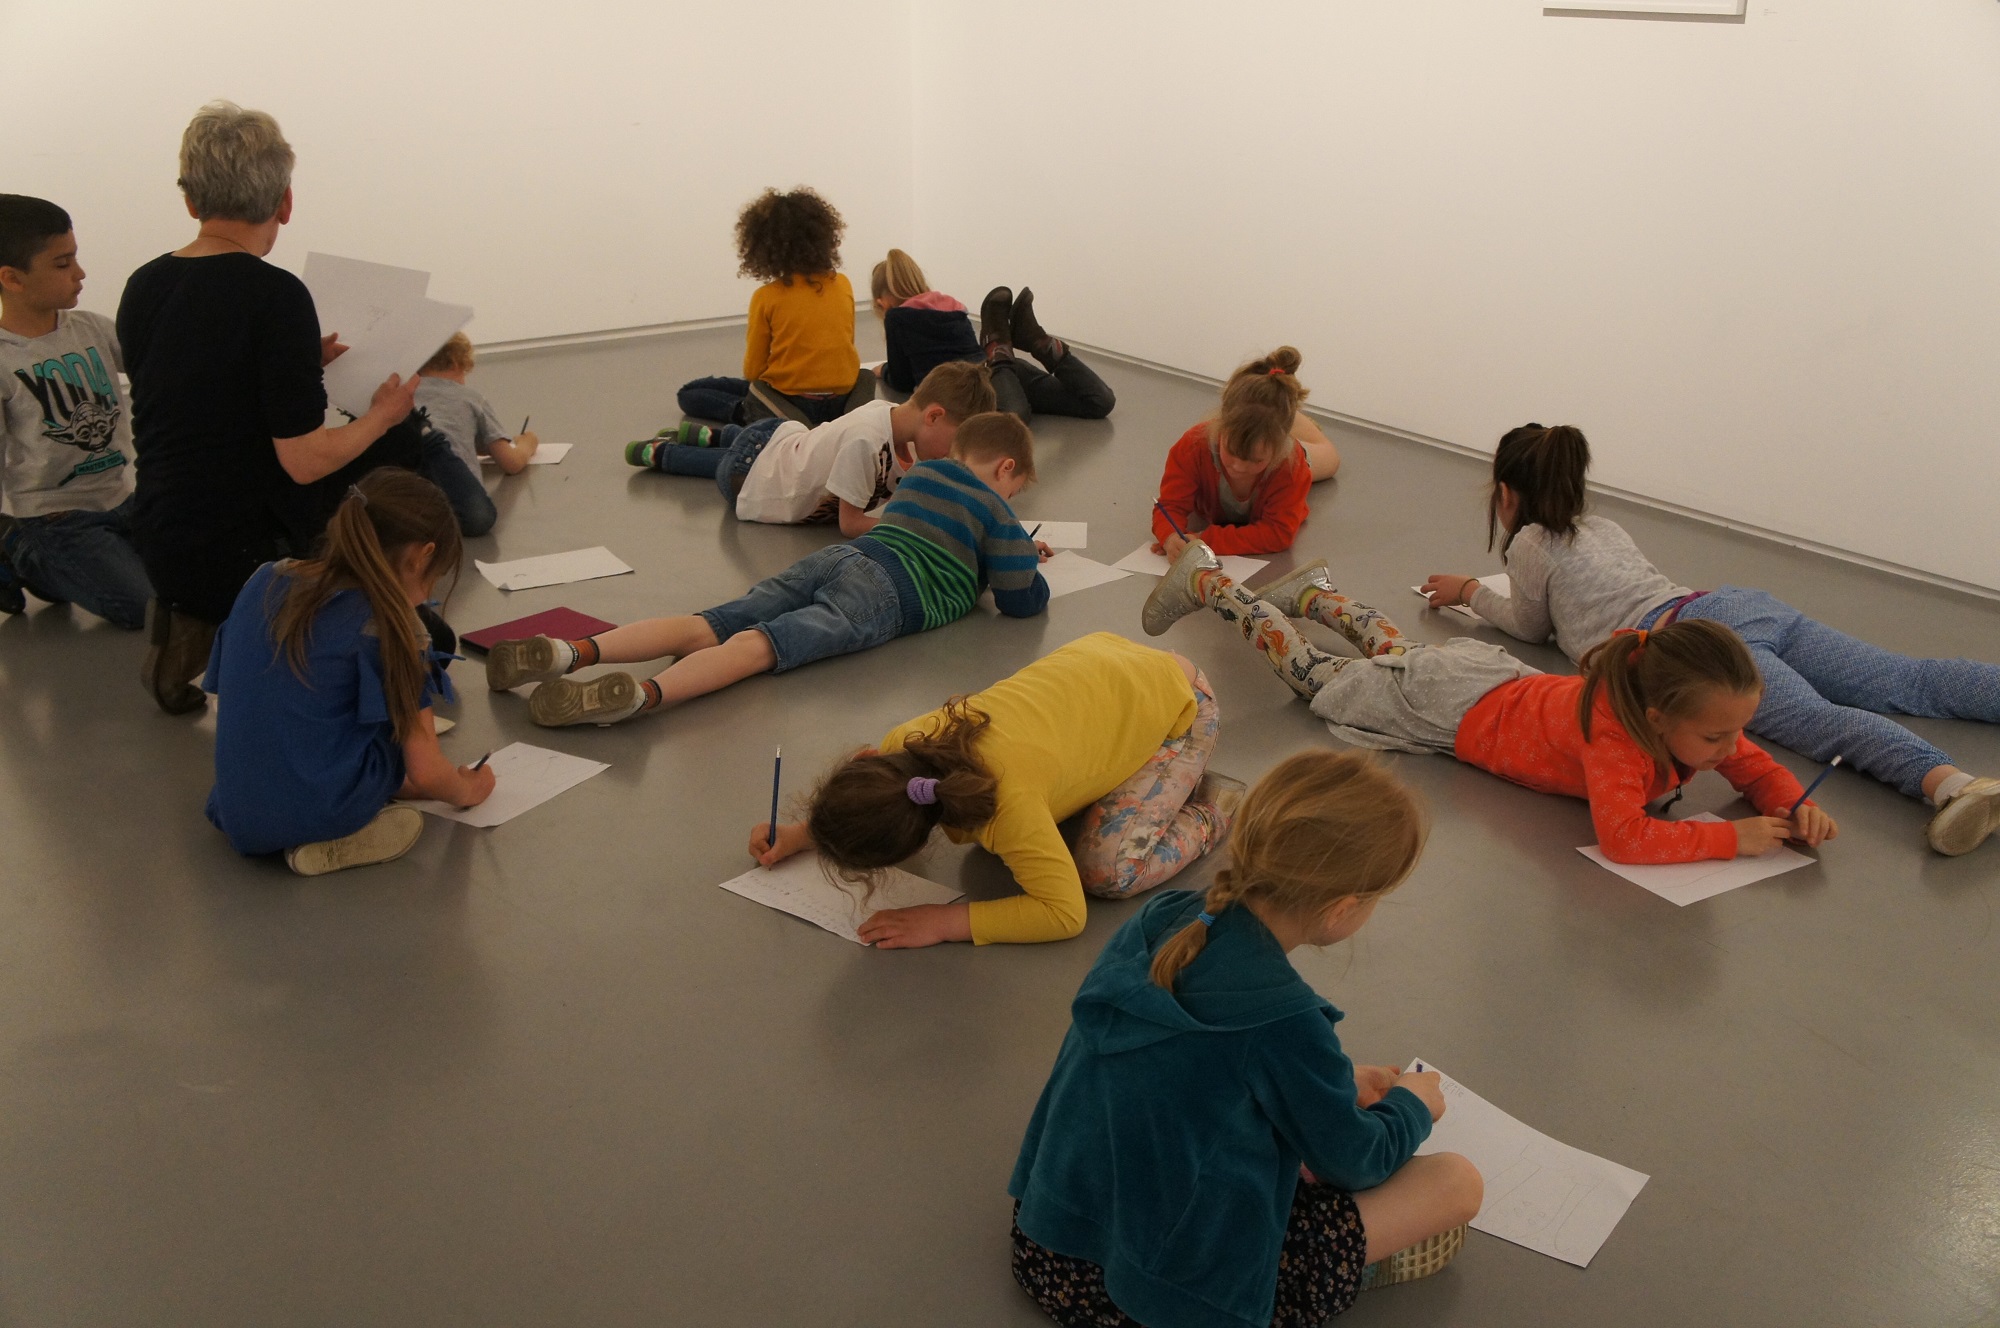 Tour and workshop in exhibition Umbau – primary education